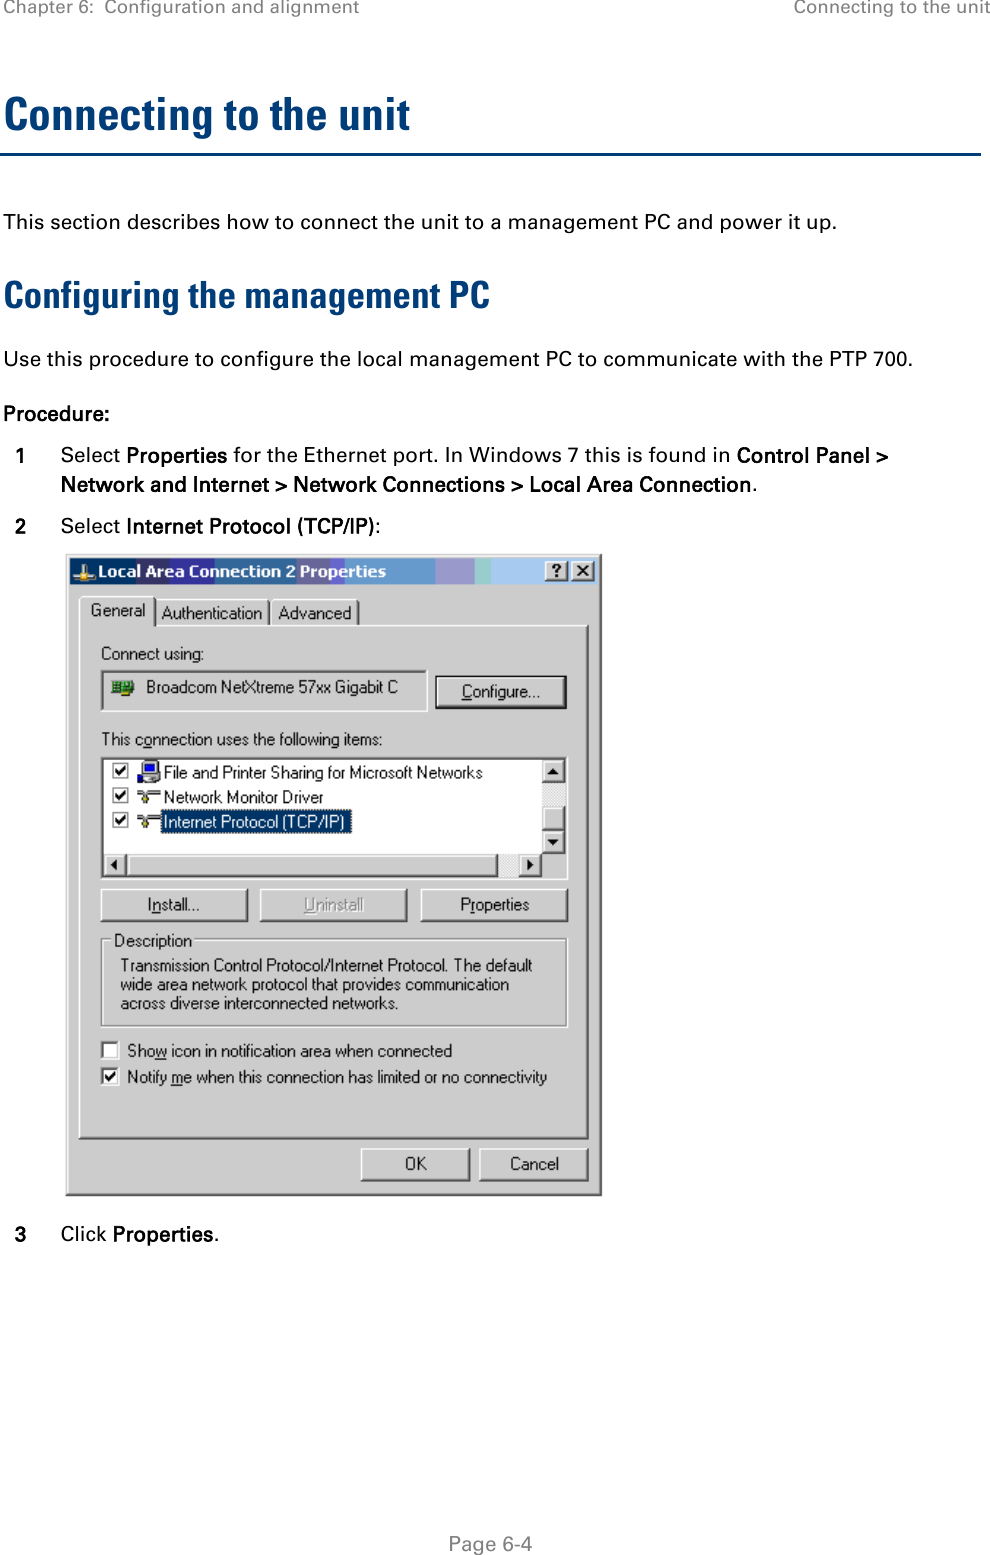 Chapter 6:  Configuration and alignment Connecting to the unit  Connecting to the unit This section describes how to connect the unit to a management PC and power it up.  Configuring the management PC Use this procedure to configure the local management PC to communicate with the PTP 700. Procedure: 1 Select Properties for the Ethernet port. In Windows 7 this is found in Control Panel &gt; Network and Internet &gt; Network Connections &gt; Local Area Connection. 2 Select Internet Protocol (TCP/IP):  3 Click Properties.  Page 6-4 